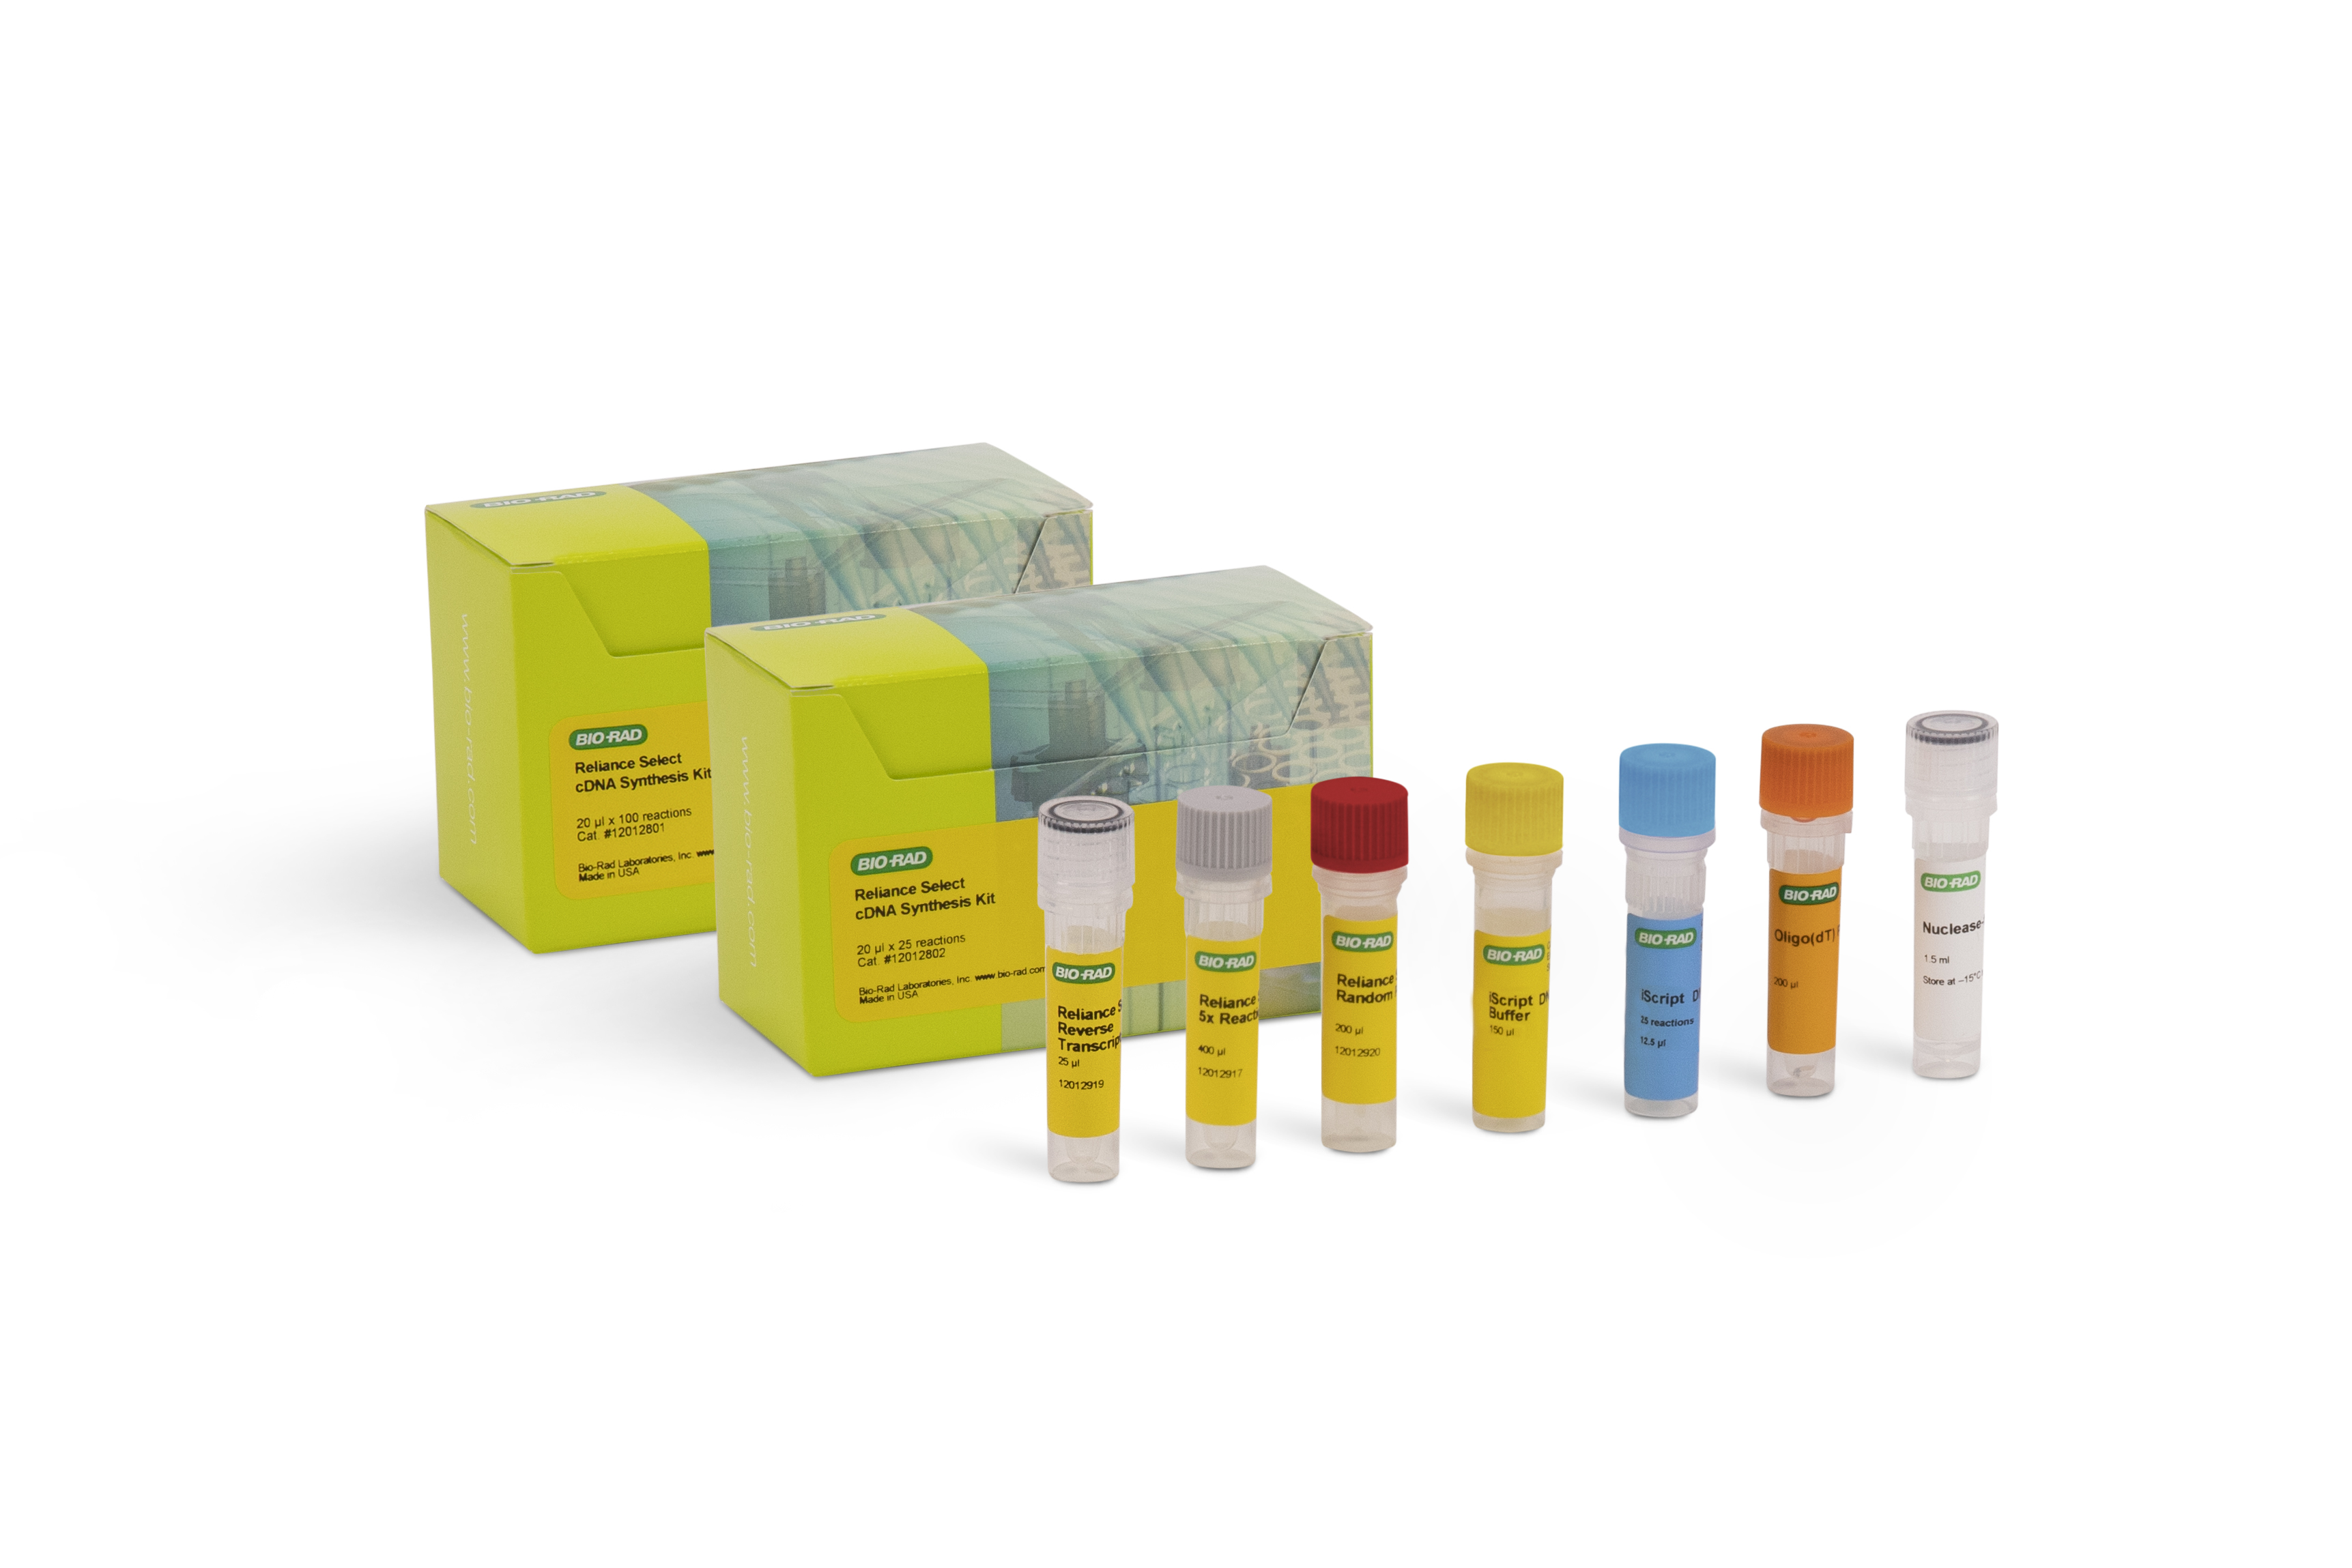 Reliance Select cDNA Synthesis Kit 